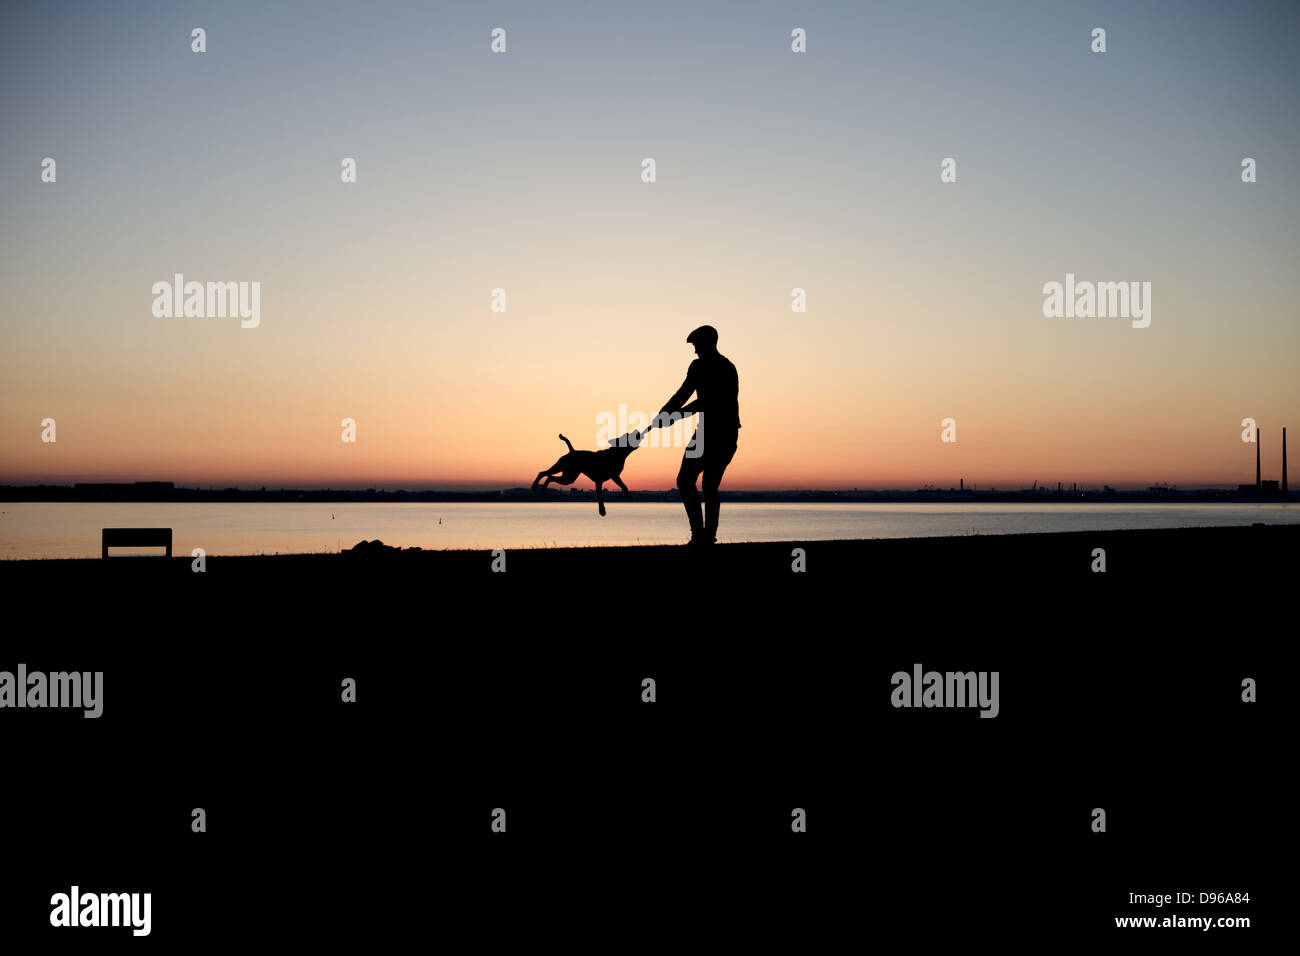 A man playing with dog with the sun setting over a bay in the background. Stock Photo